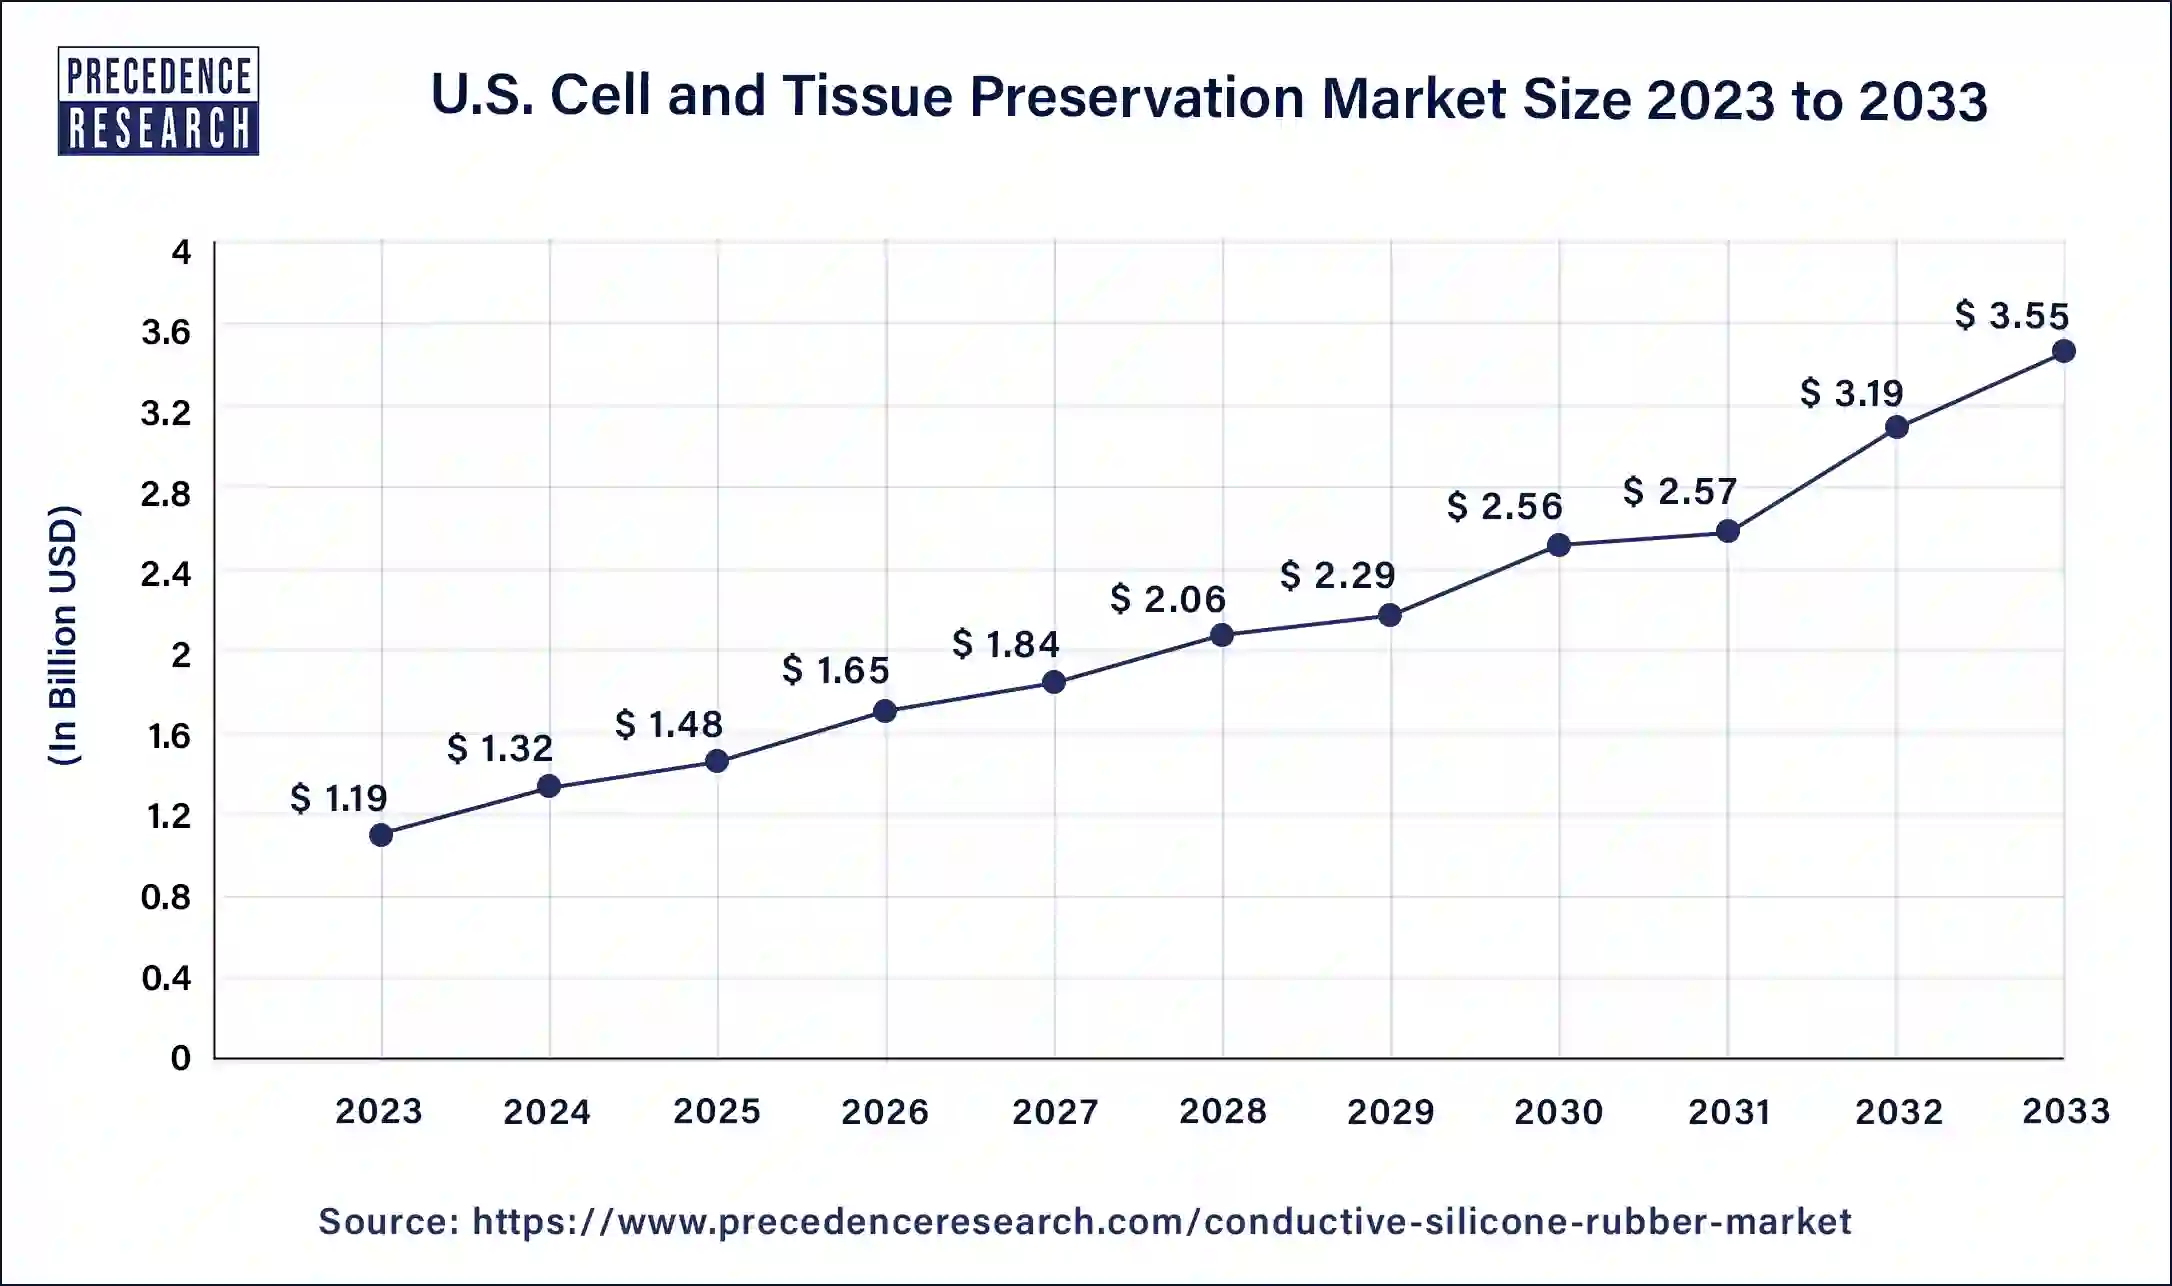 U.S. Cell and Tissue Preservation Market Size 2024 to 2033